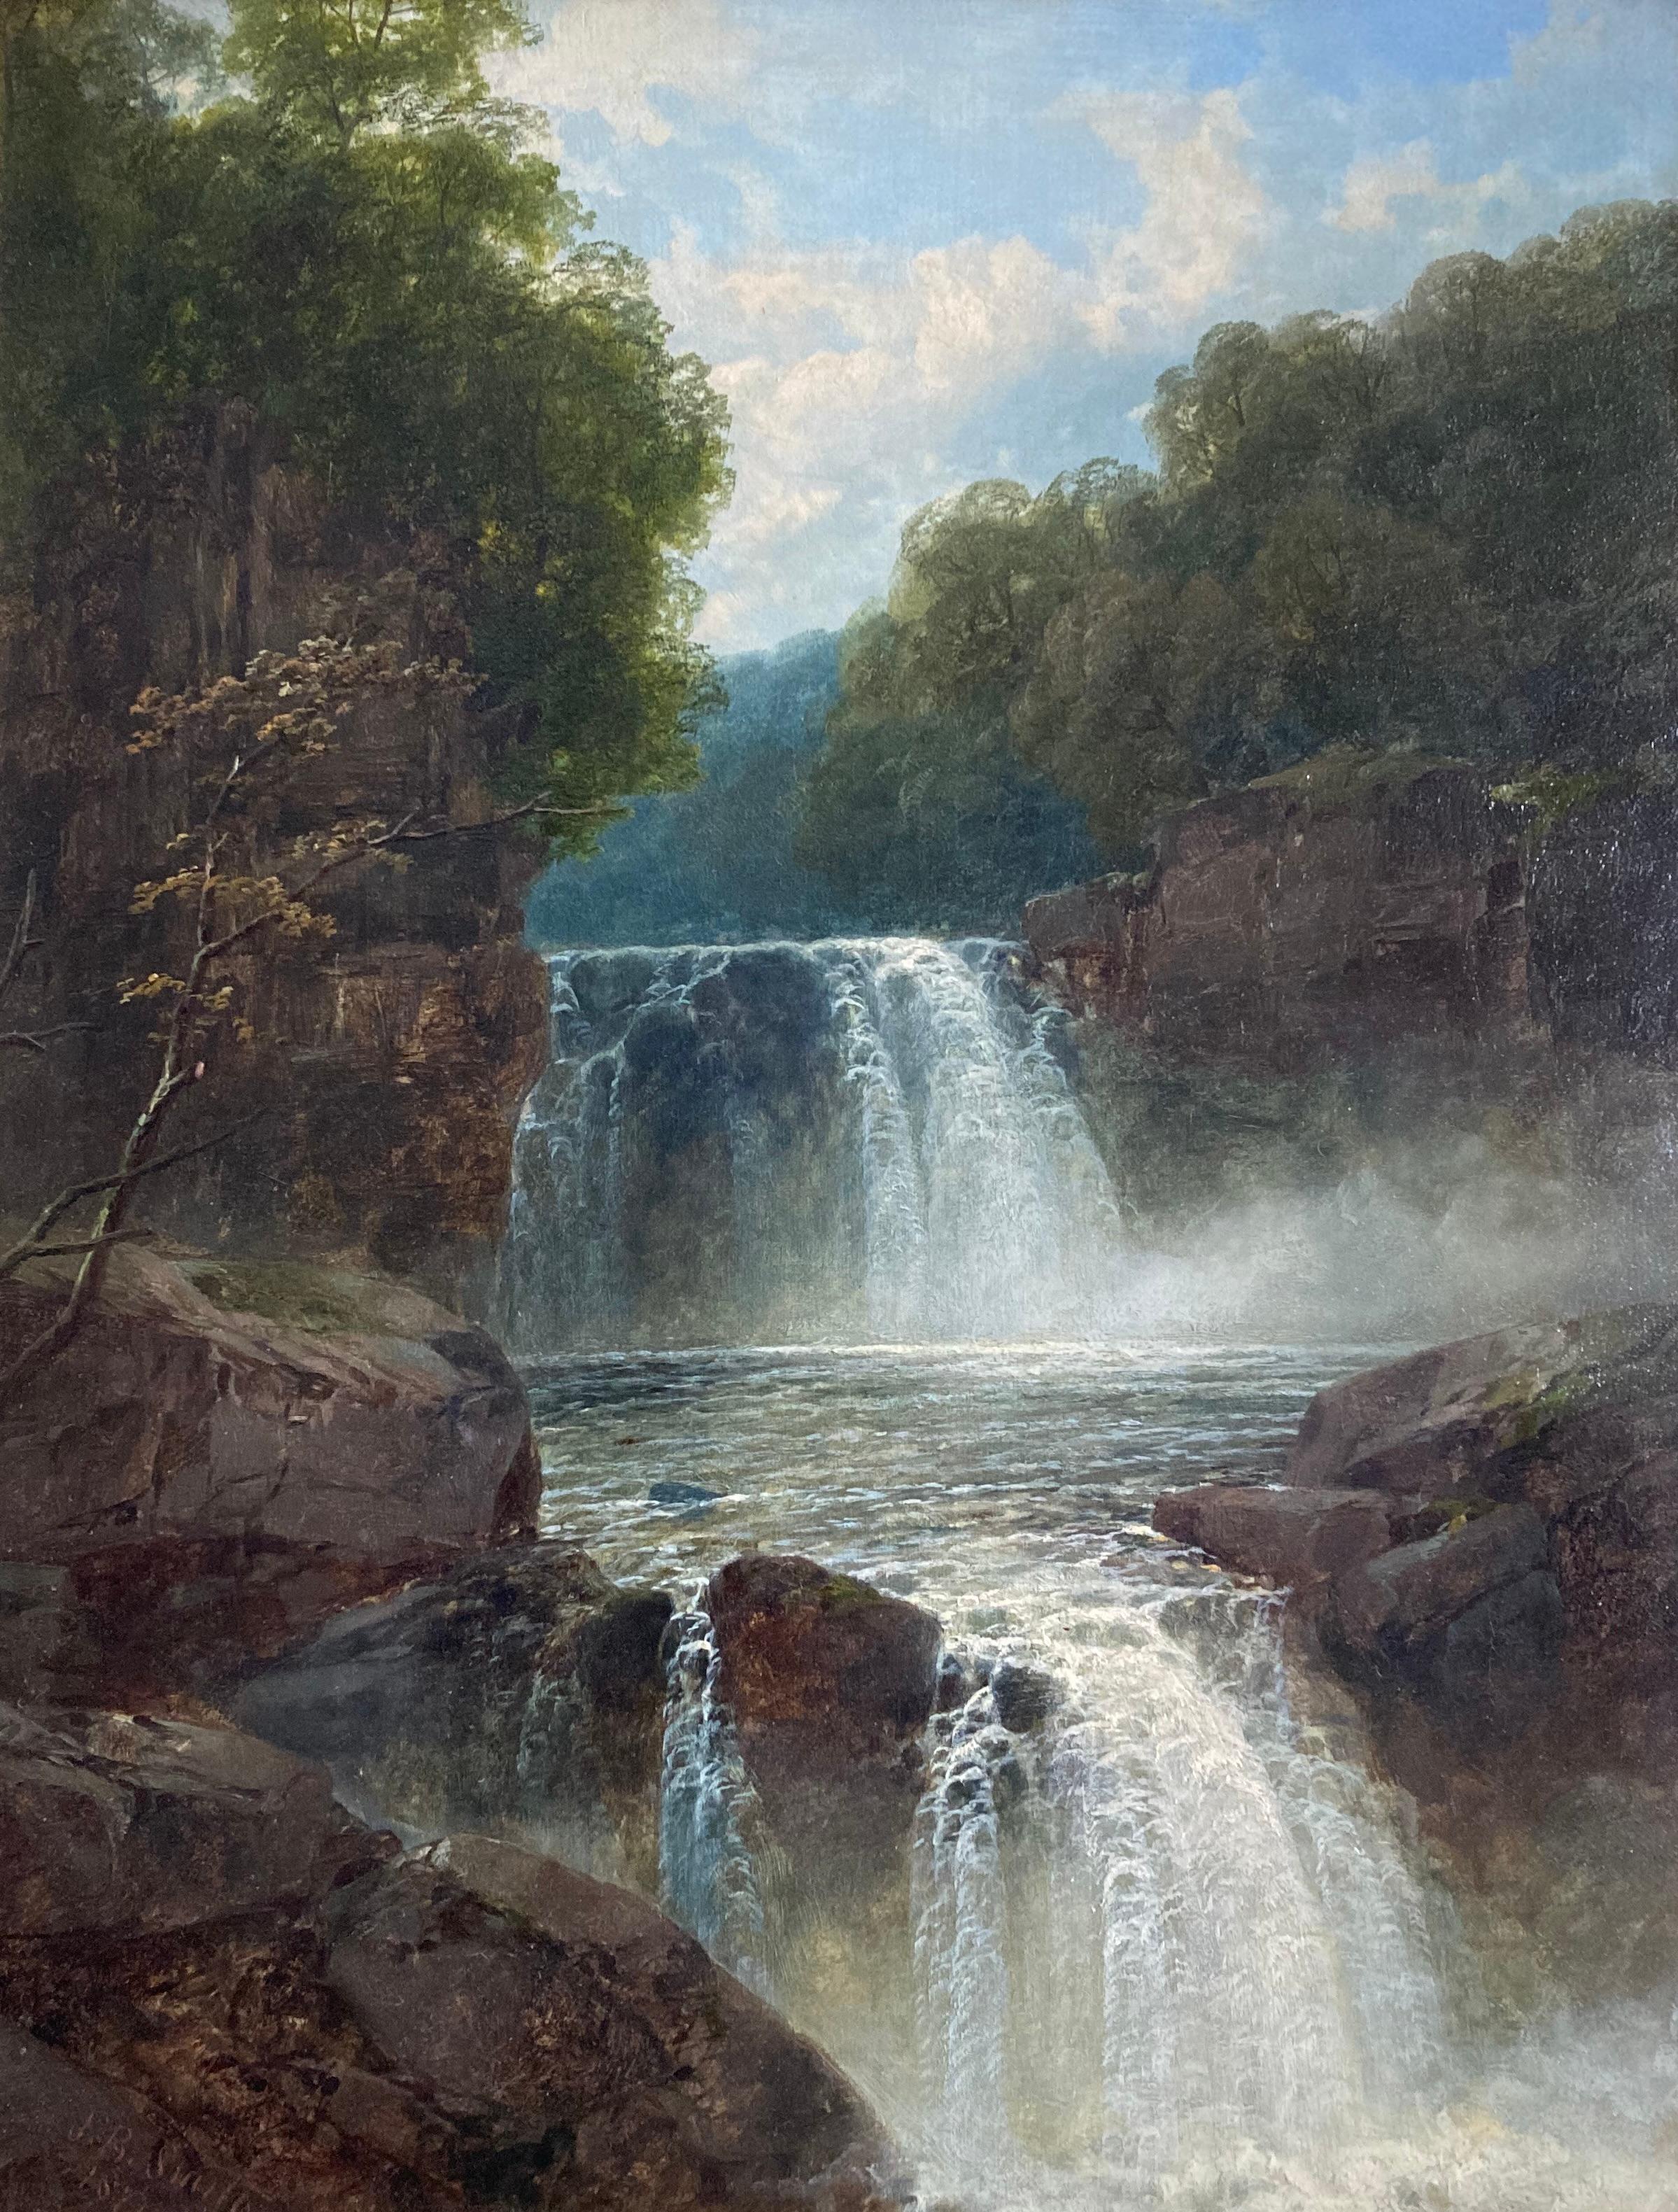 An idyllic view of a waterfall in full spate near Betwys-Y-Coed, Wales.

John Brandon Smith (1848-1884)
Waterfall near Betwys-Y-Coed
Signed
Oil on canvas
18 x 14 inches without frame
26 x 22 with frame

John Brandon Smith was a London landscape